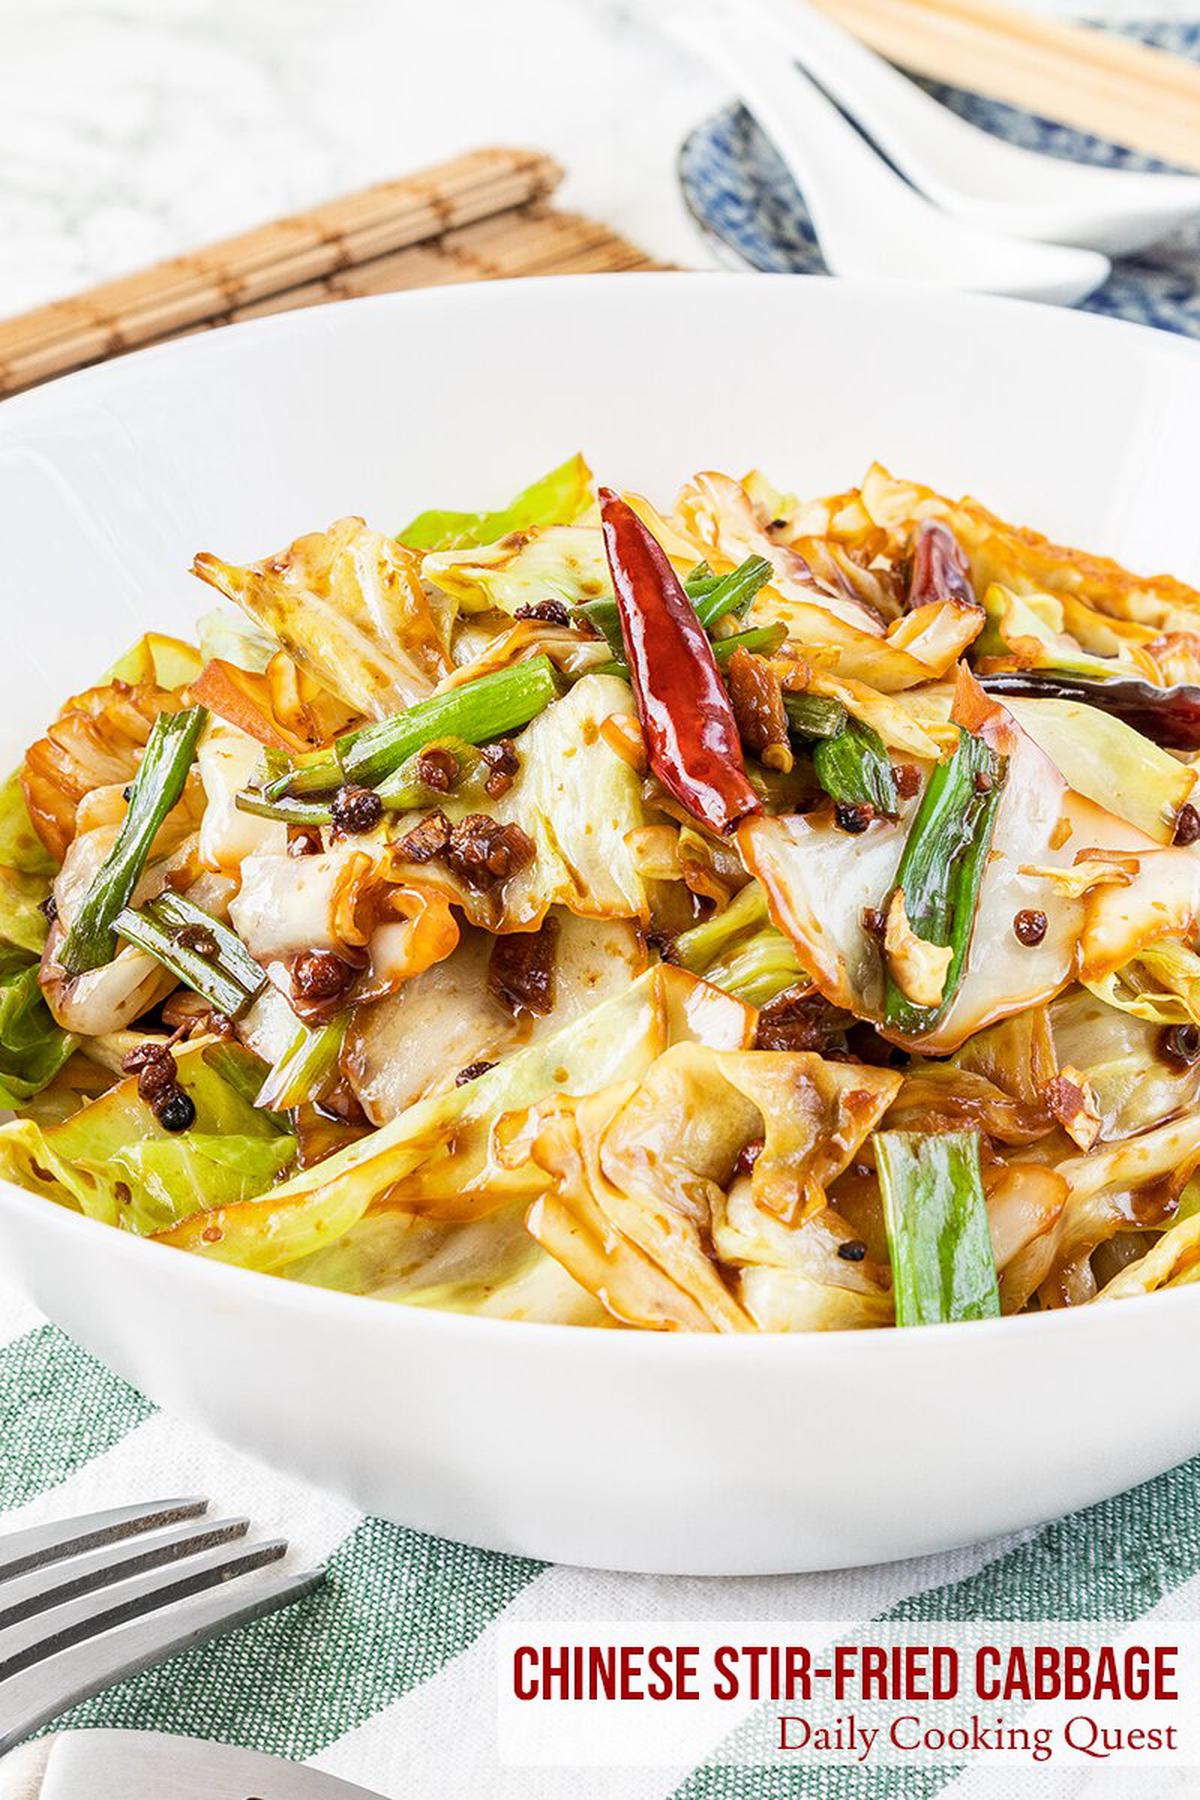 Chinese stir-fried cabbage.